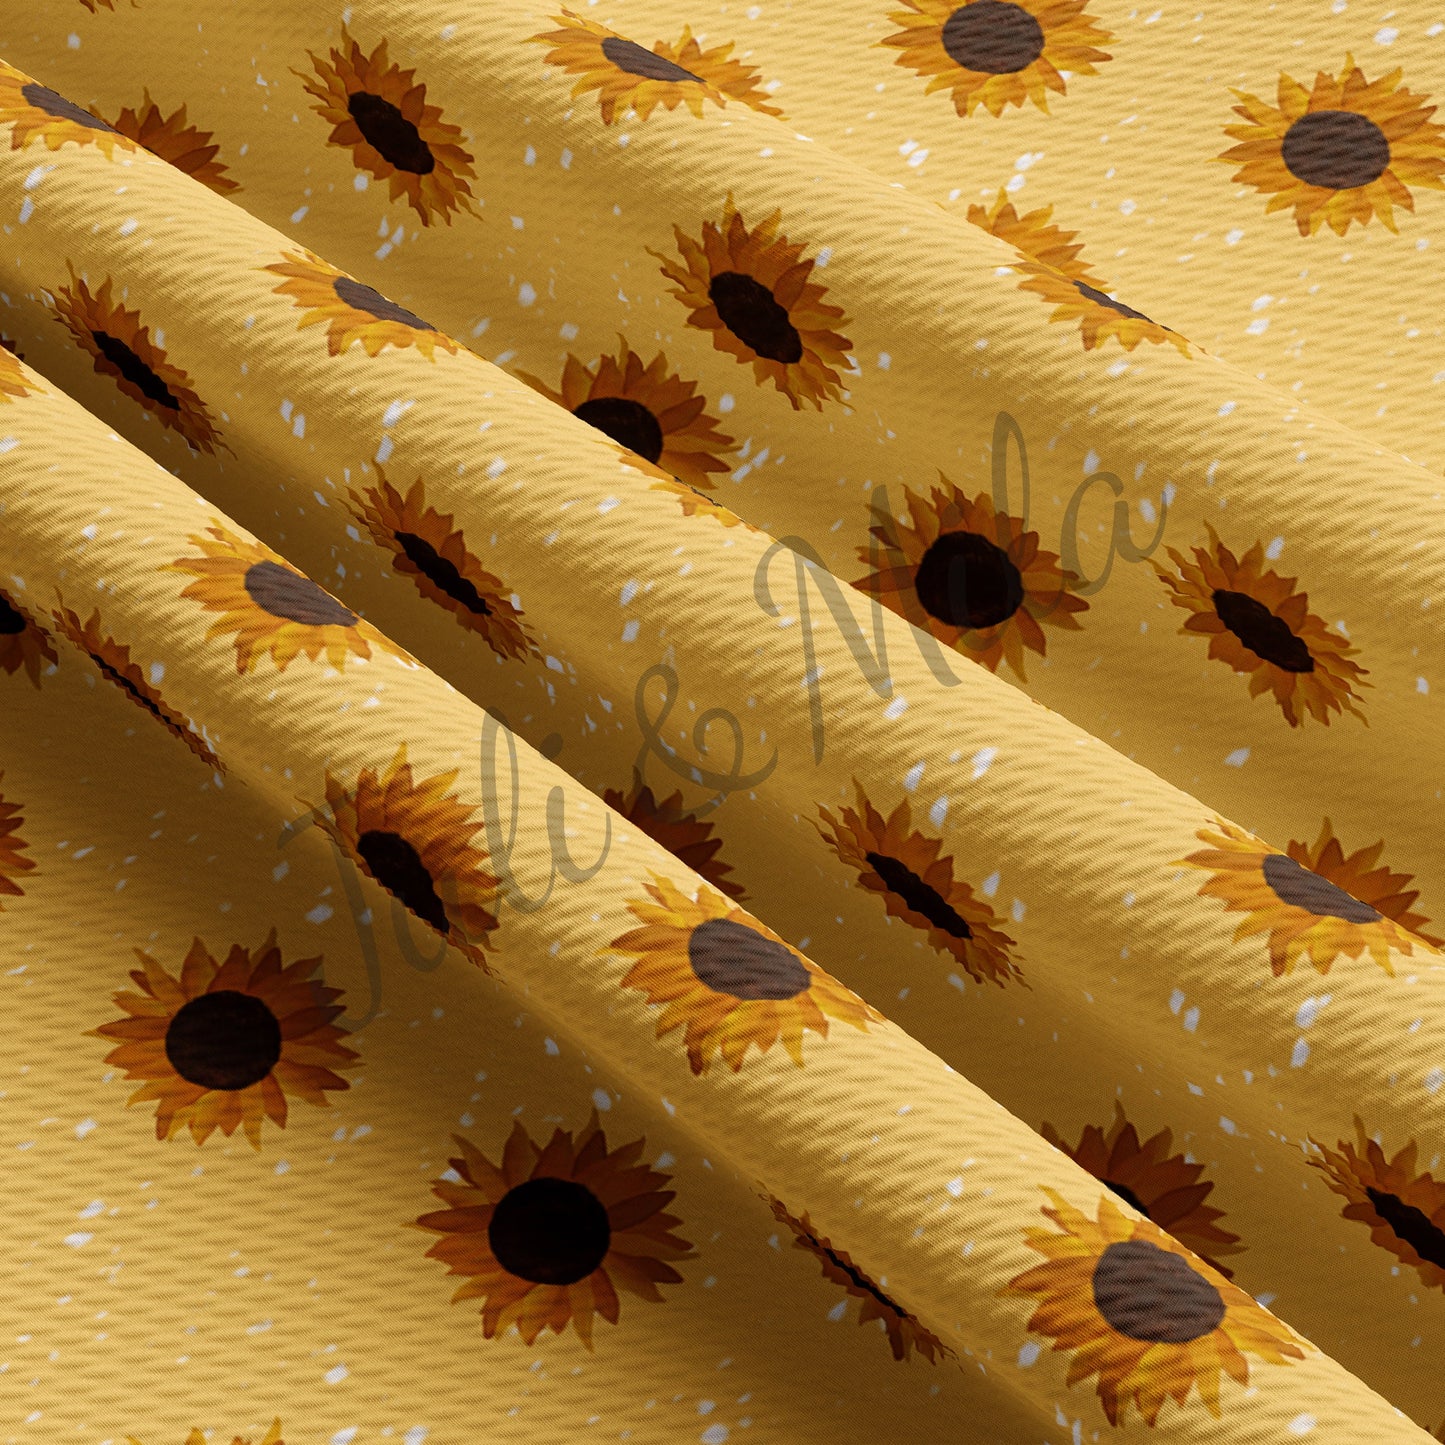 Printed Liverpool Bullet Textured Fabric  (sunflower)